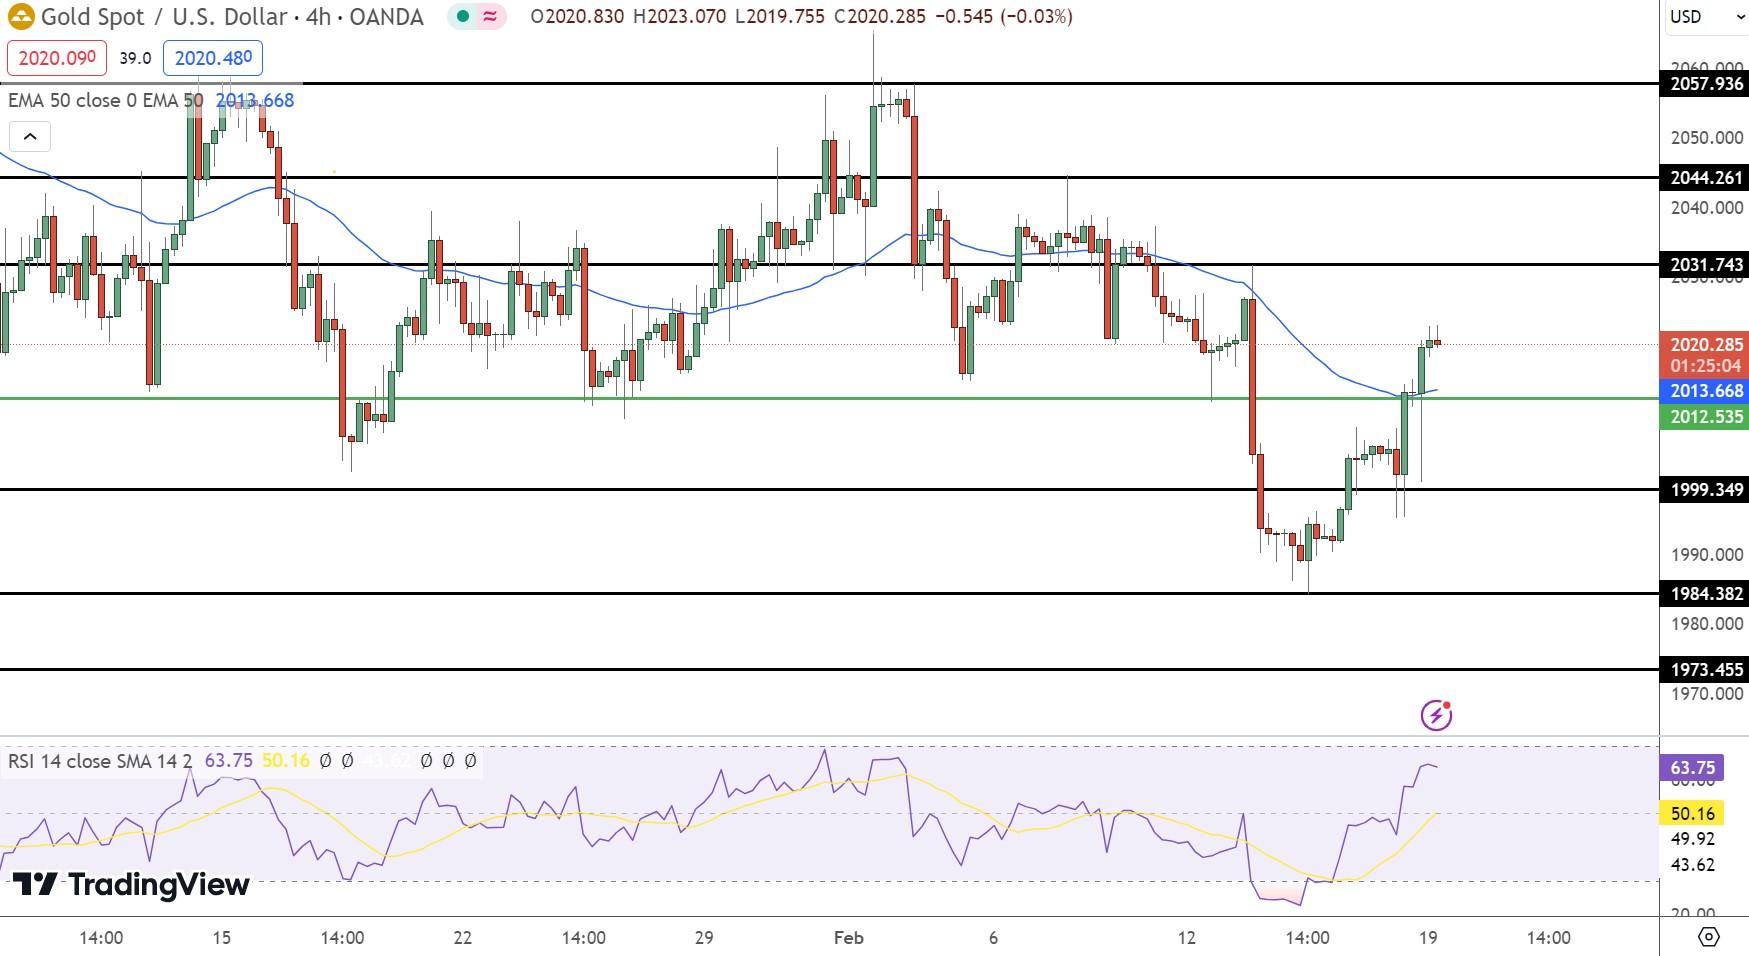 Gold Price Chart - Source: Tradingview